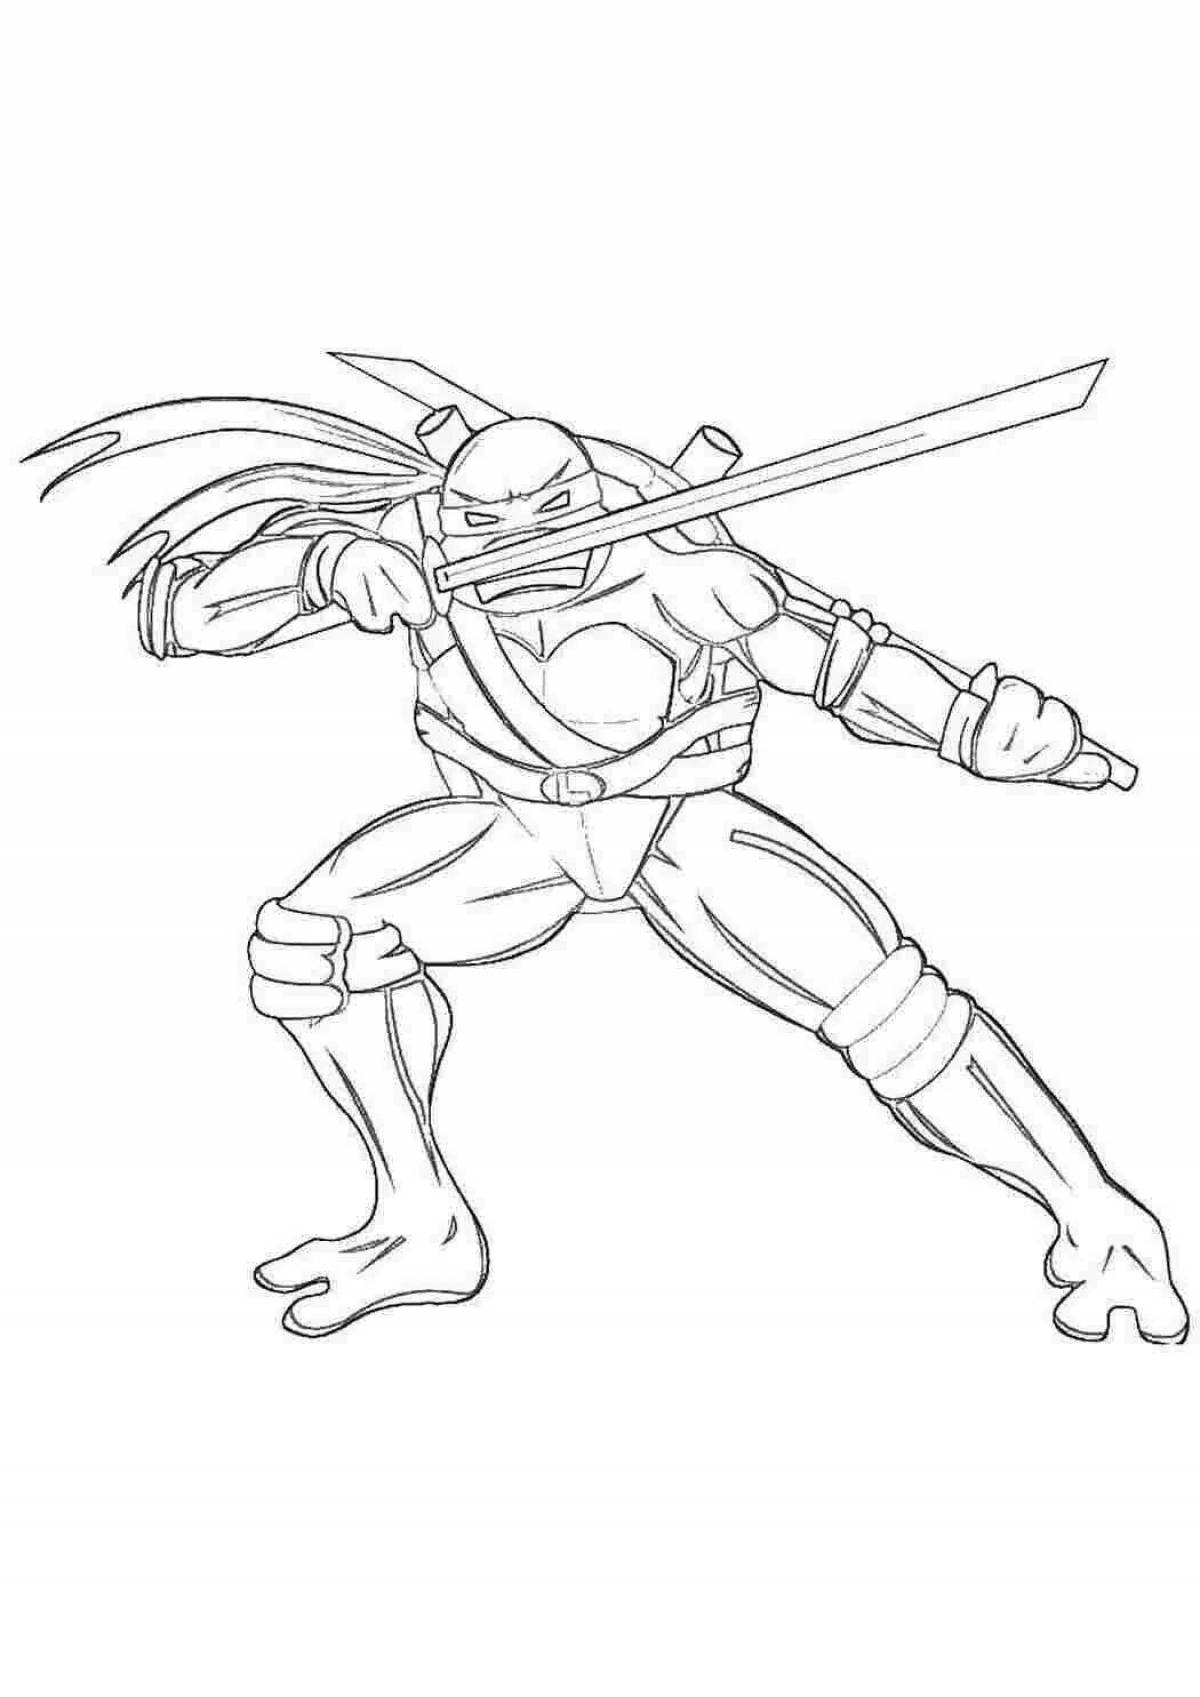 Majestic ninja coloring pages for boys